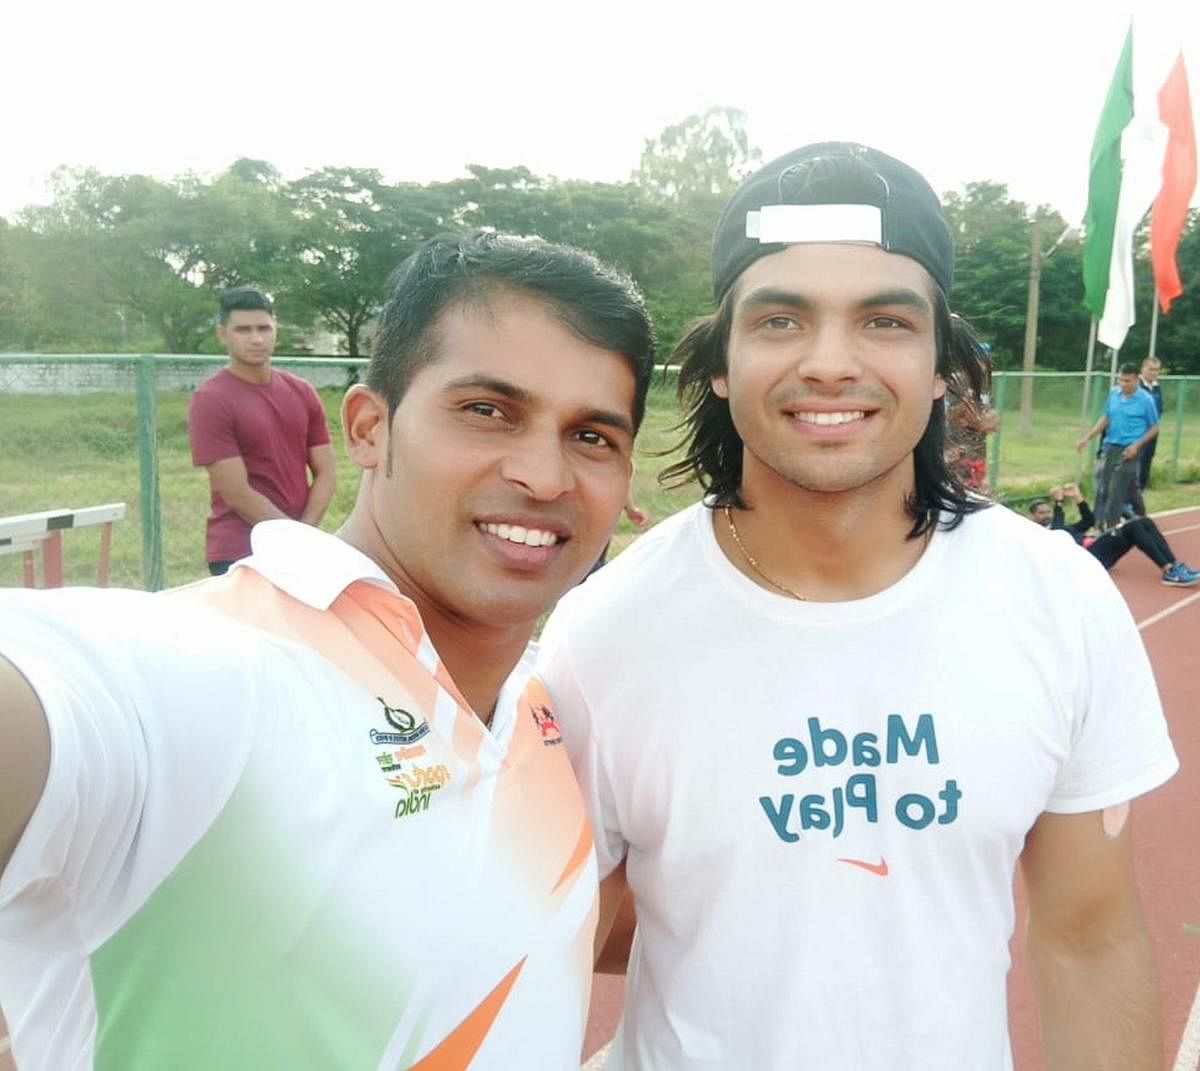 Coach Kashinath Naik takes a selfie with Neeraj Chopra during the latter’s training stint at Indian Army sports facility at Patiala. Credit: DH File Photo